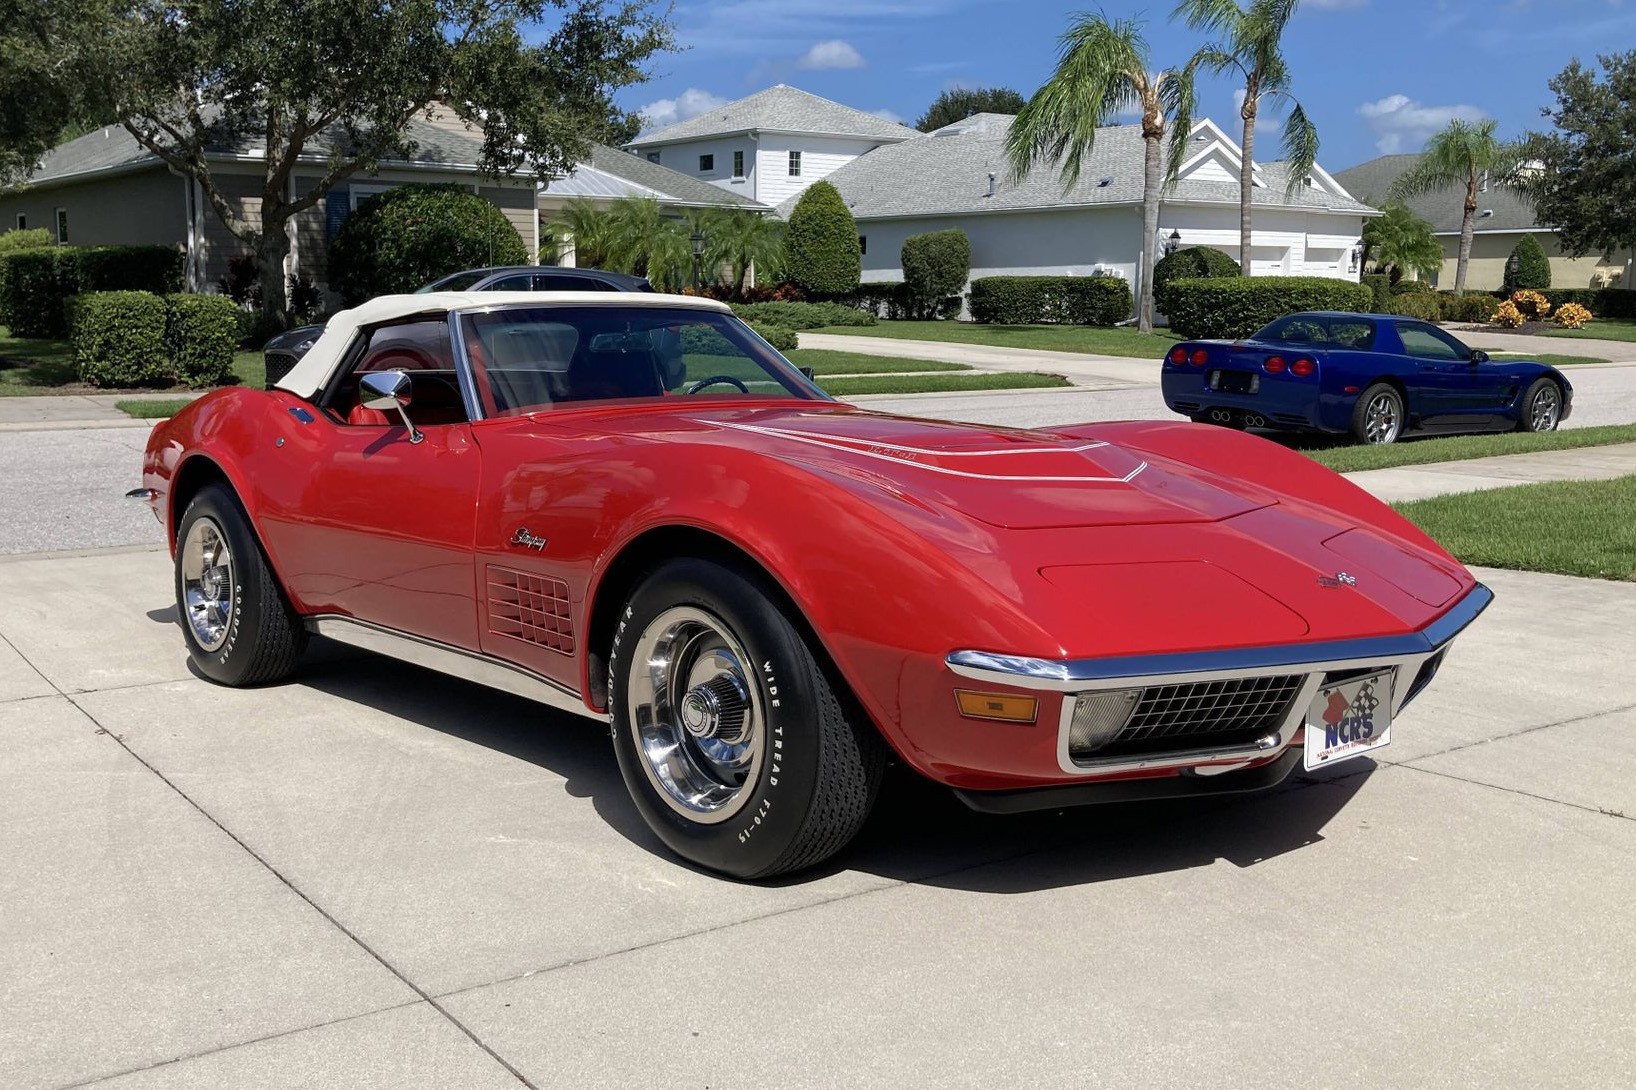 Hemmings.com Weekly Round Up: a '71 Corvette LT1, an XK120 SE, and a 'Cuda 340